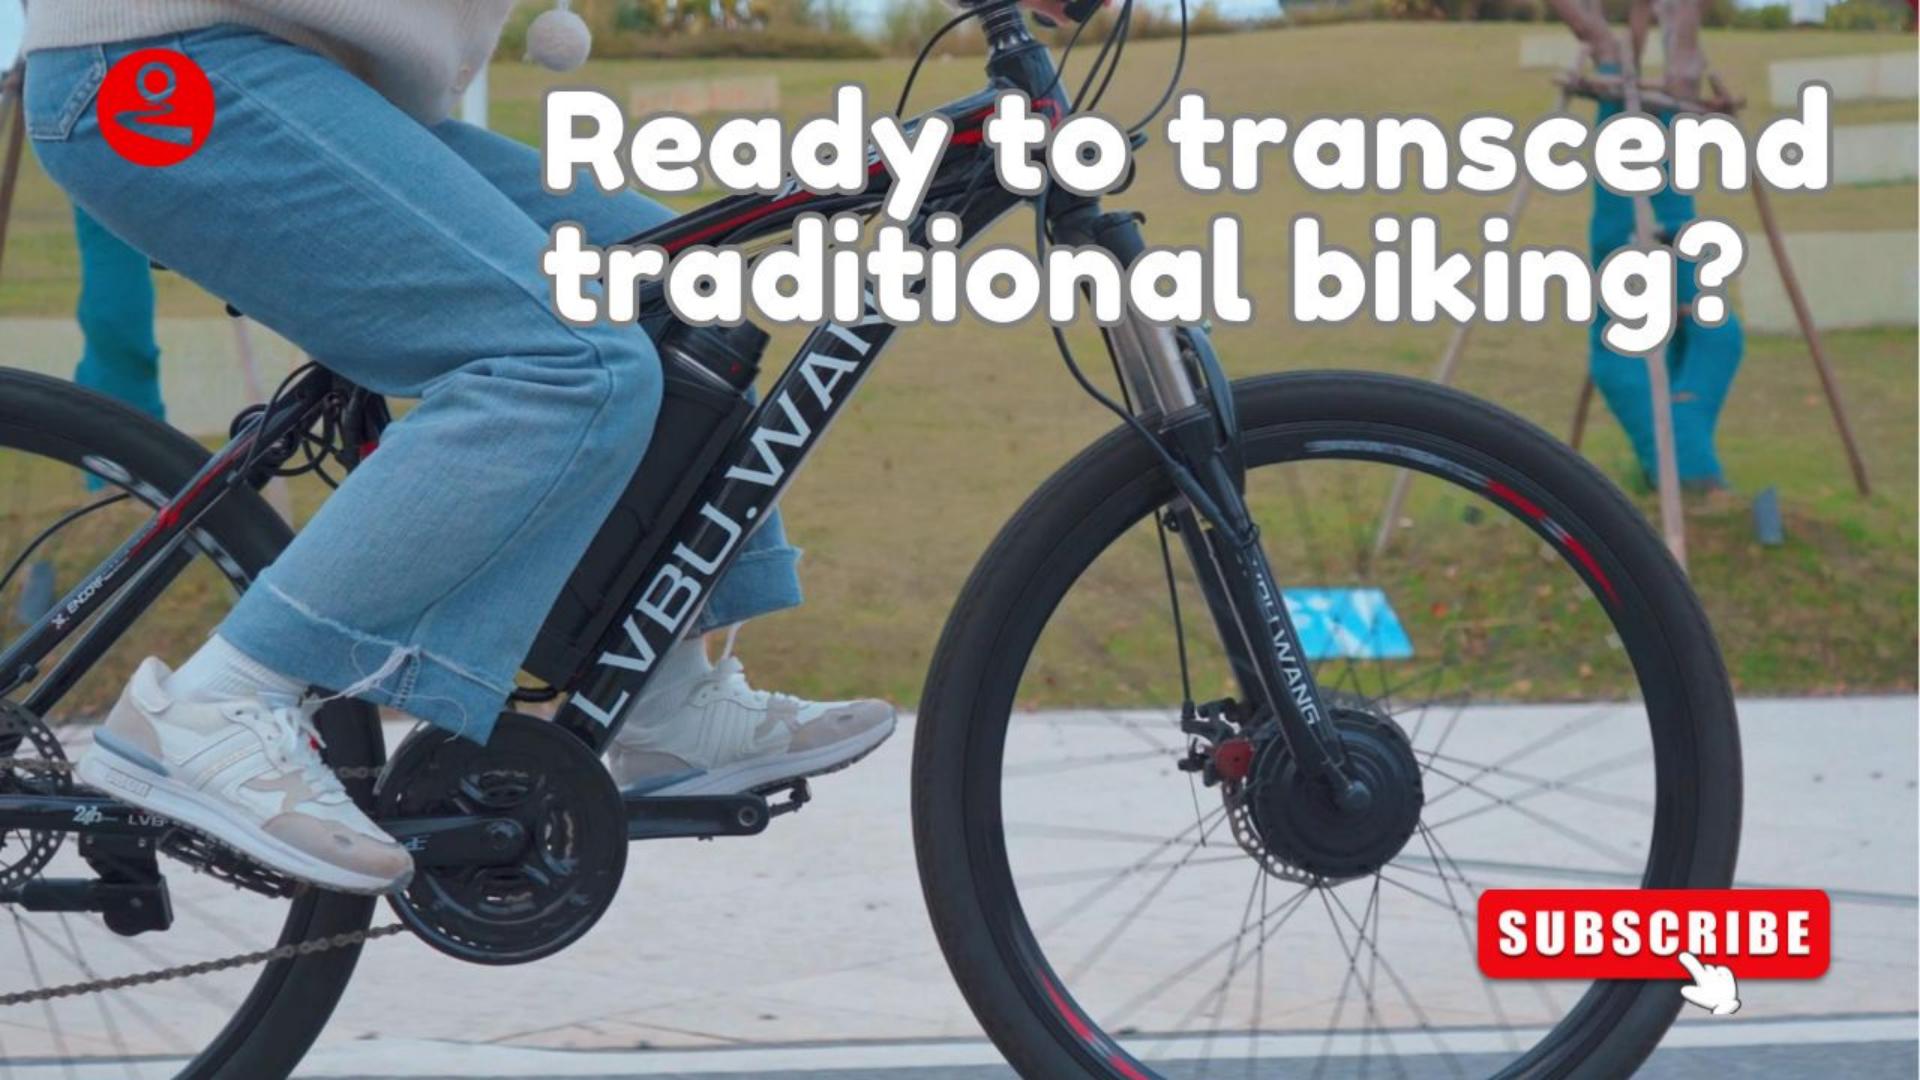 Ready to transcend traditional biking? Experience the ultimate freedom and speed with our electric b